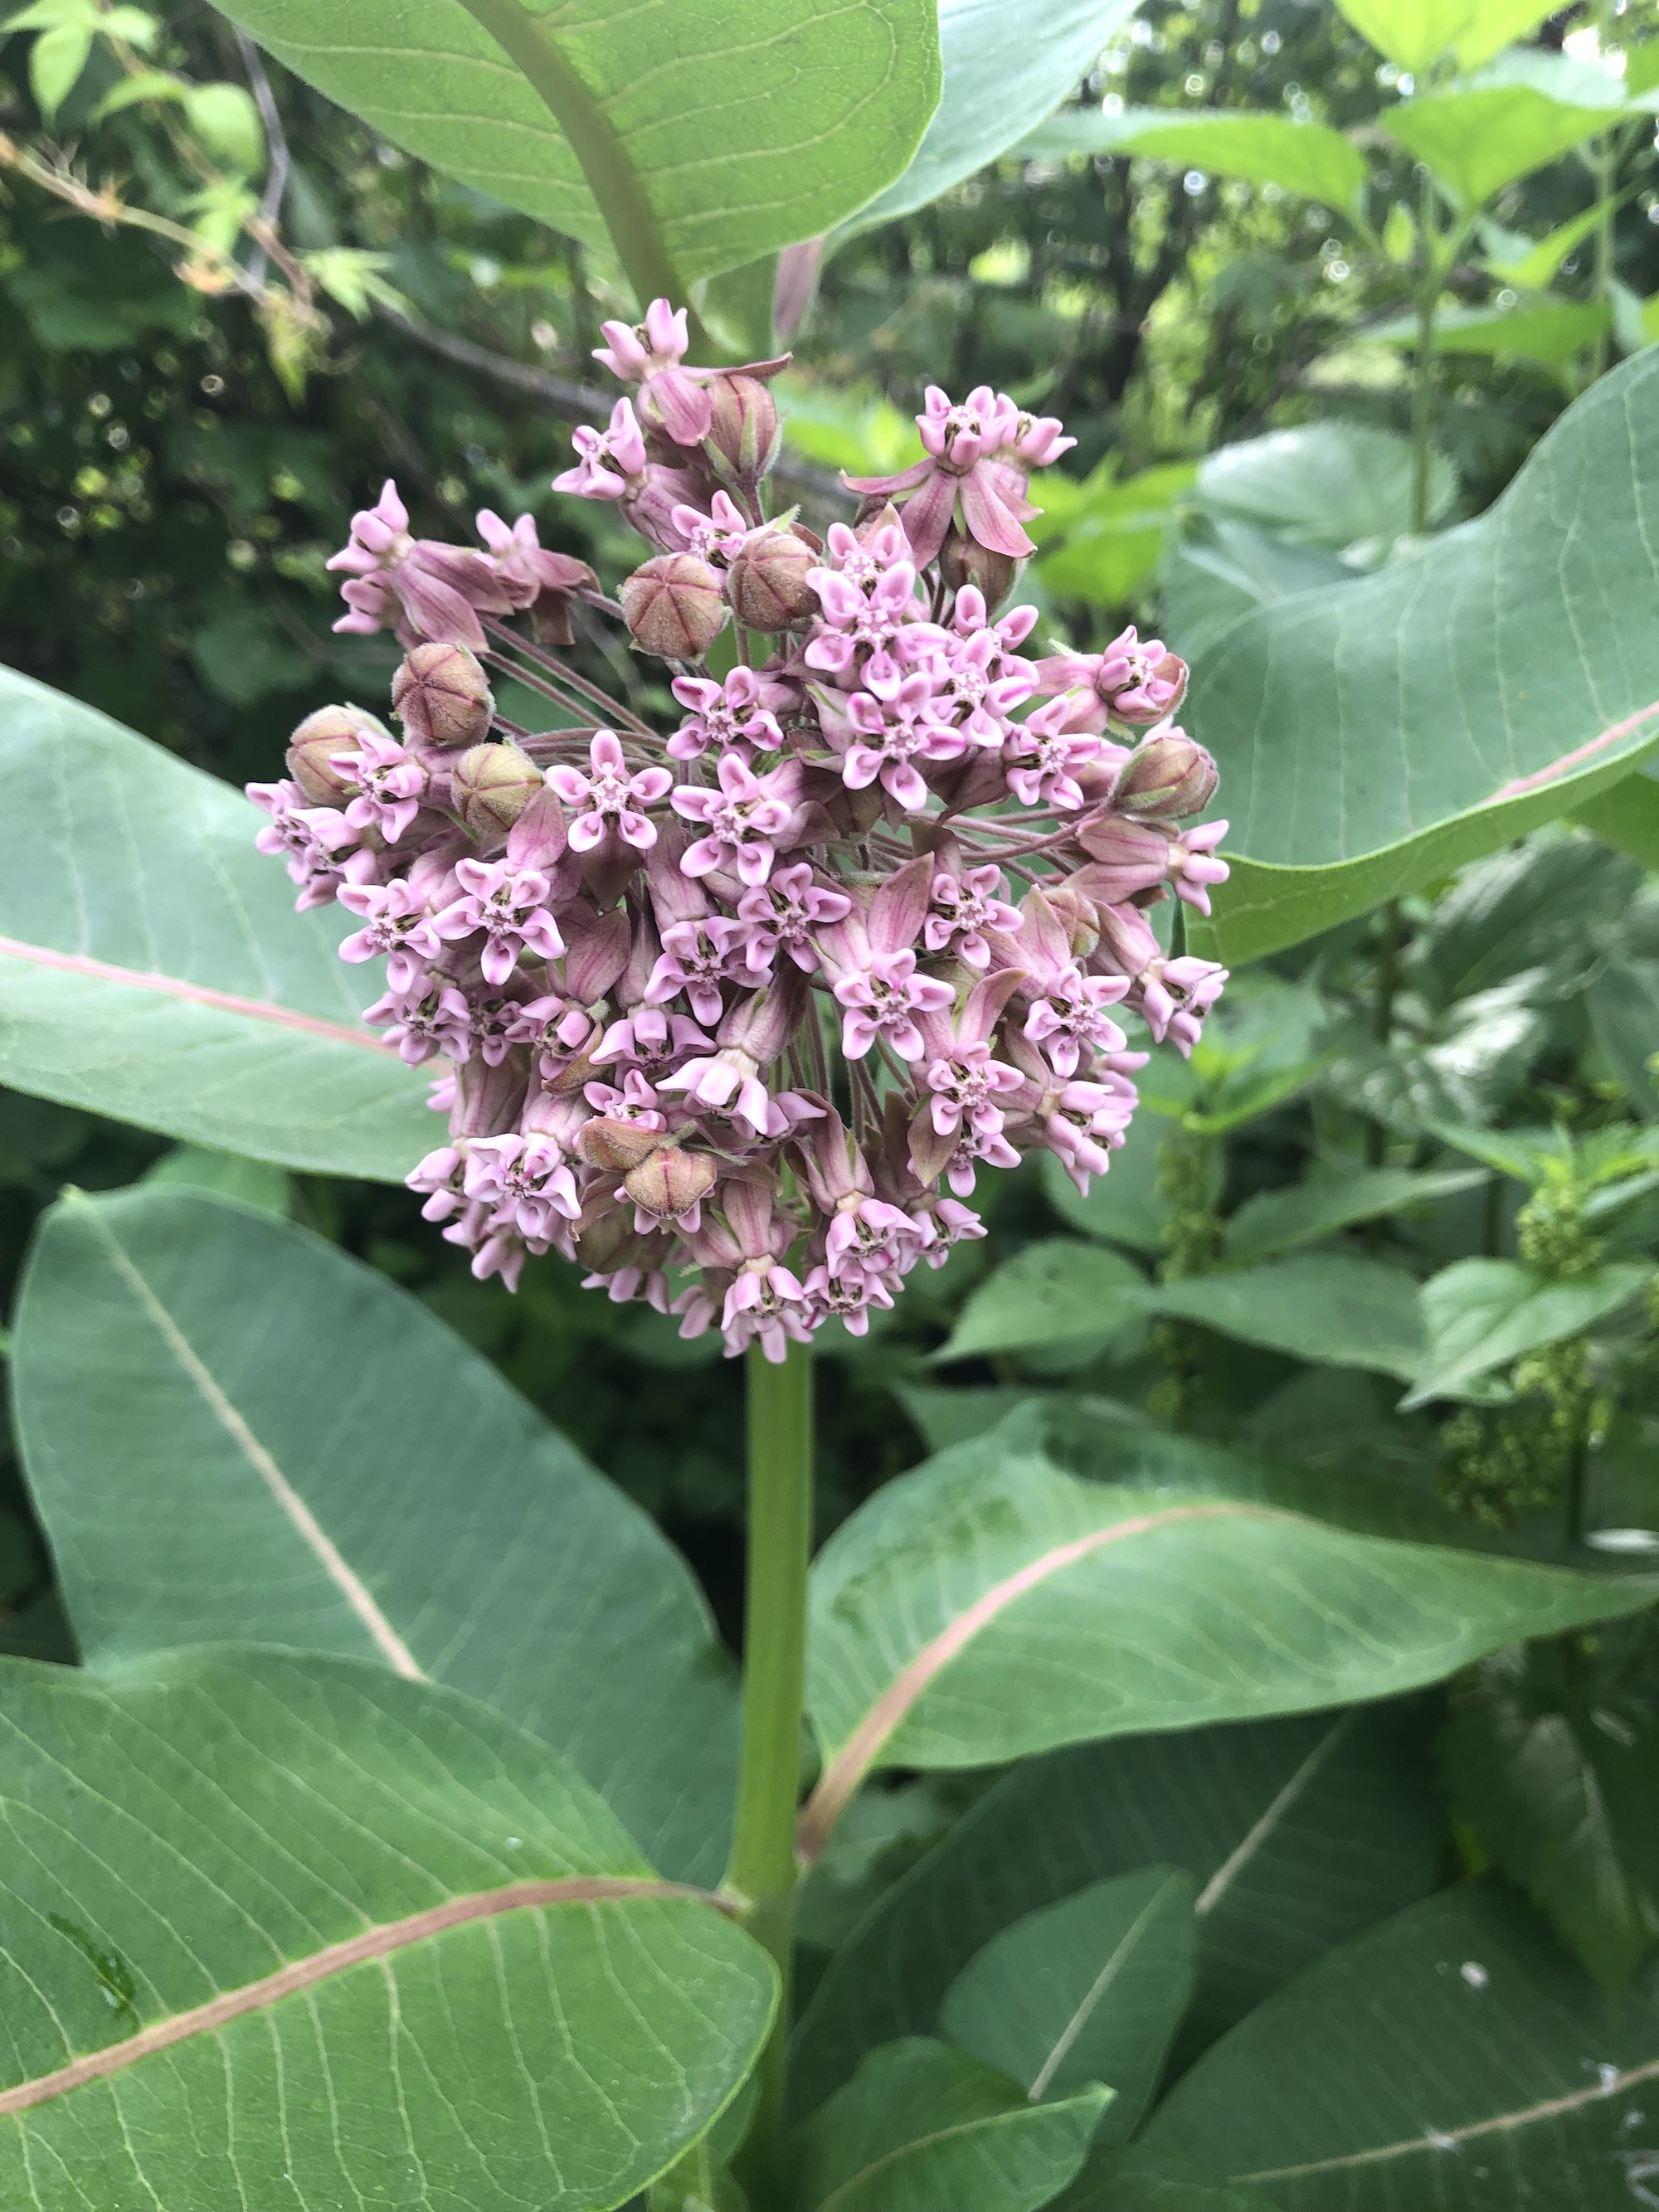 Commmon Milkweed by Duck Pond on June 30, 2019.